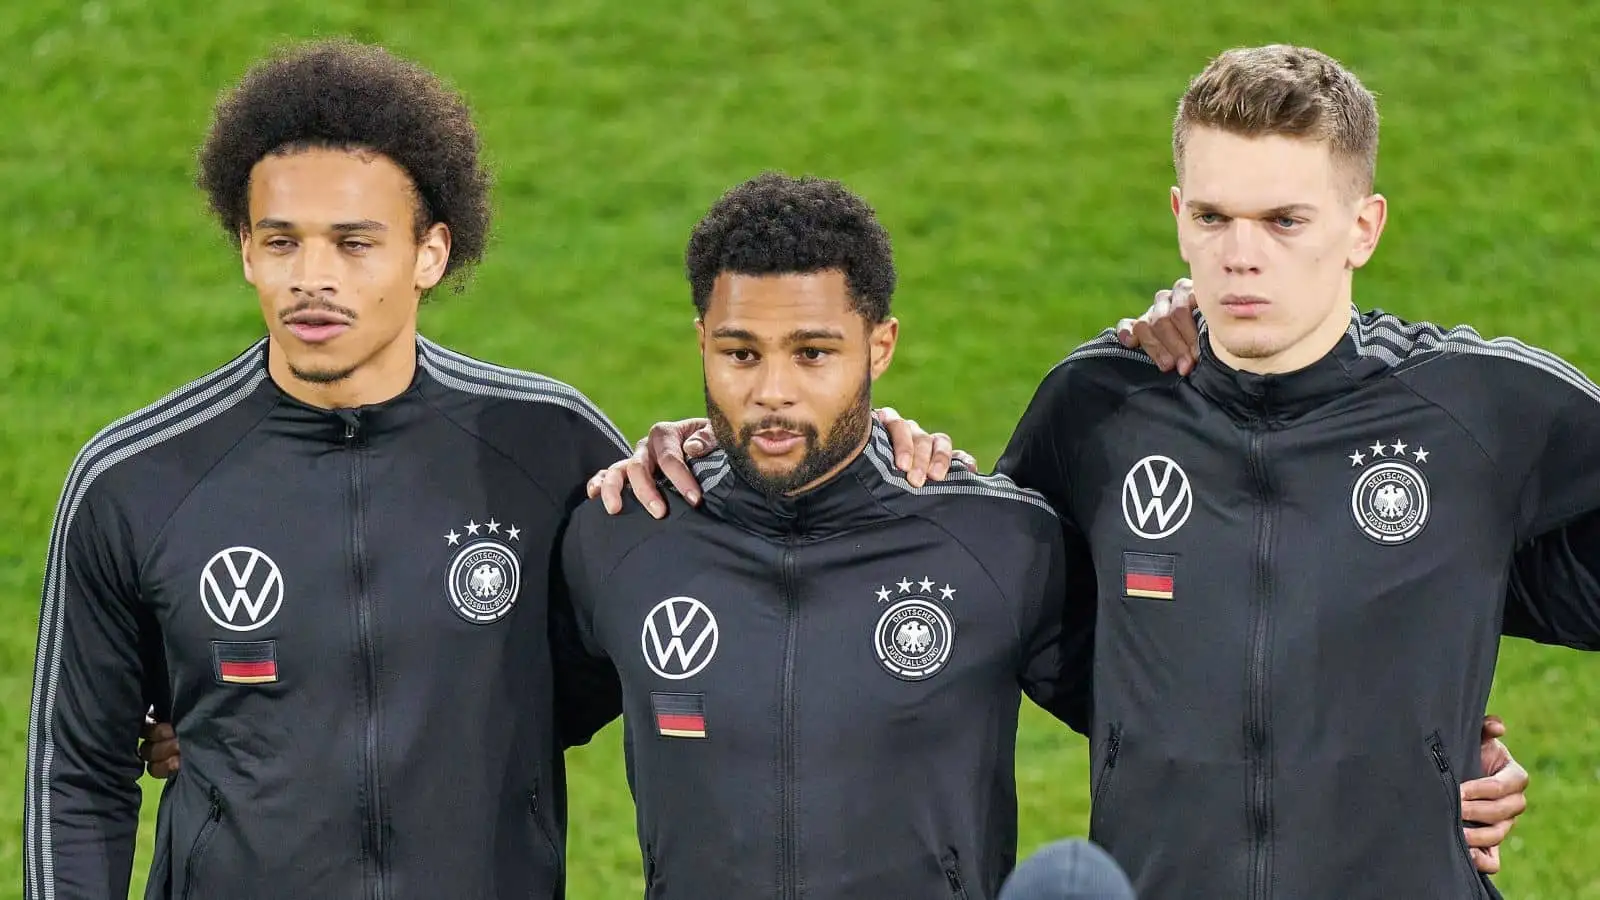 Leroy Sane, Serge Gnabry, Matthias Ginter, Germany players ahead of World Cup qualifier v Iceland